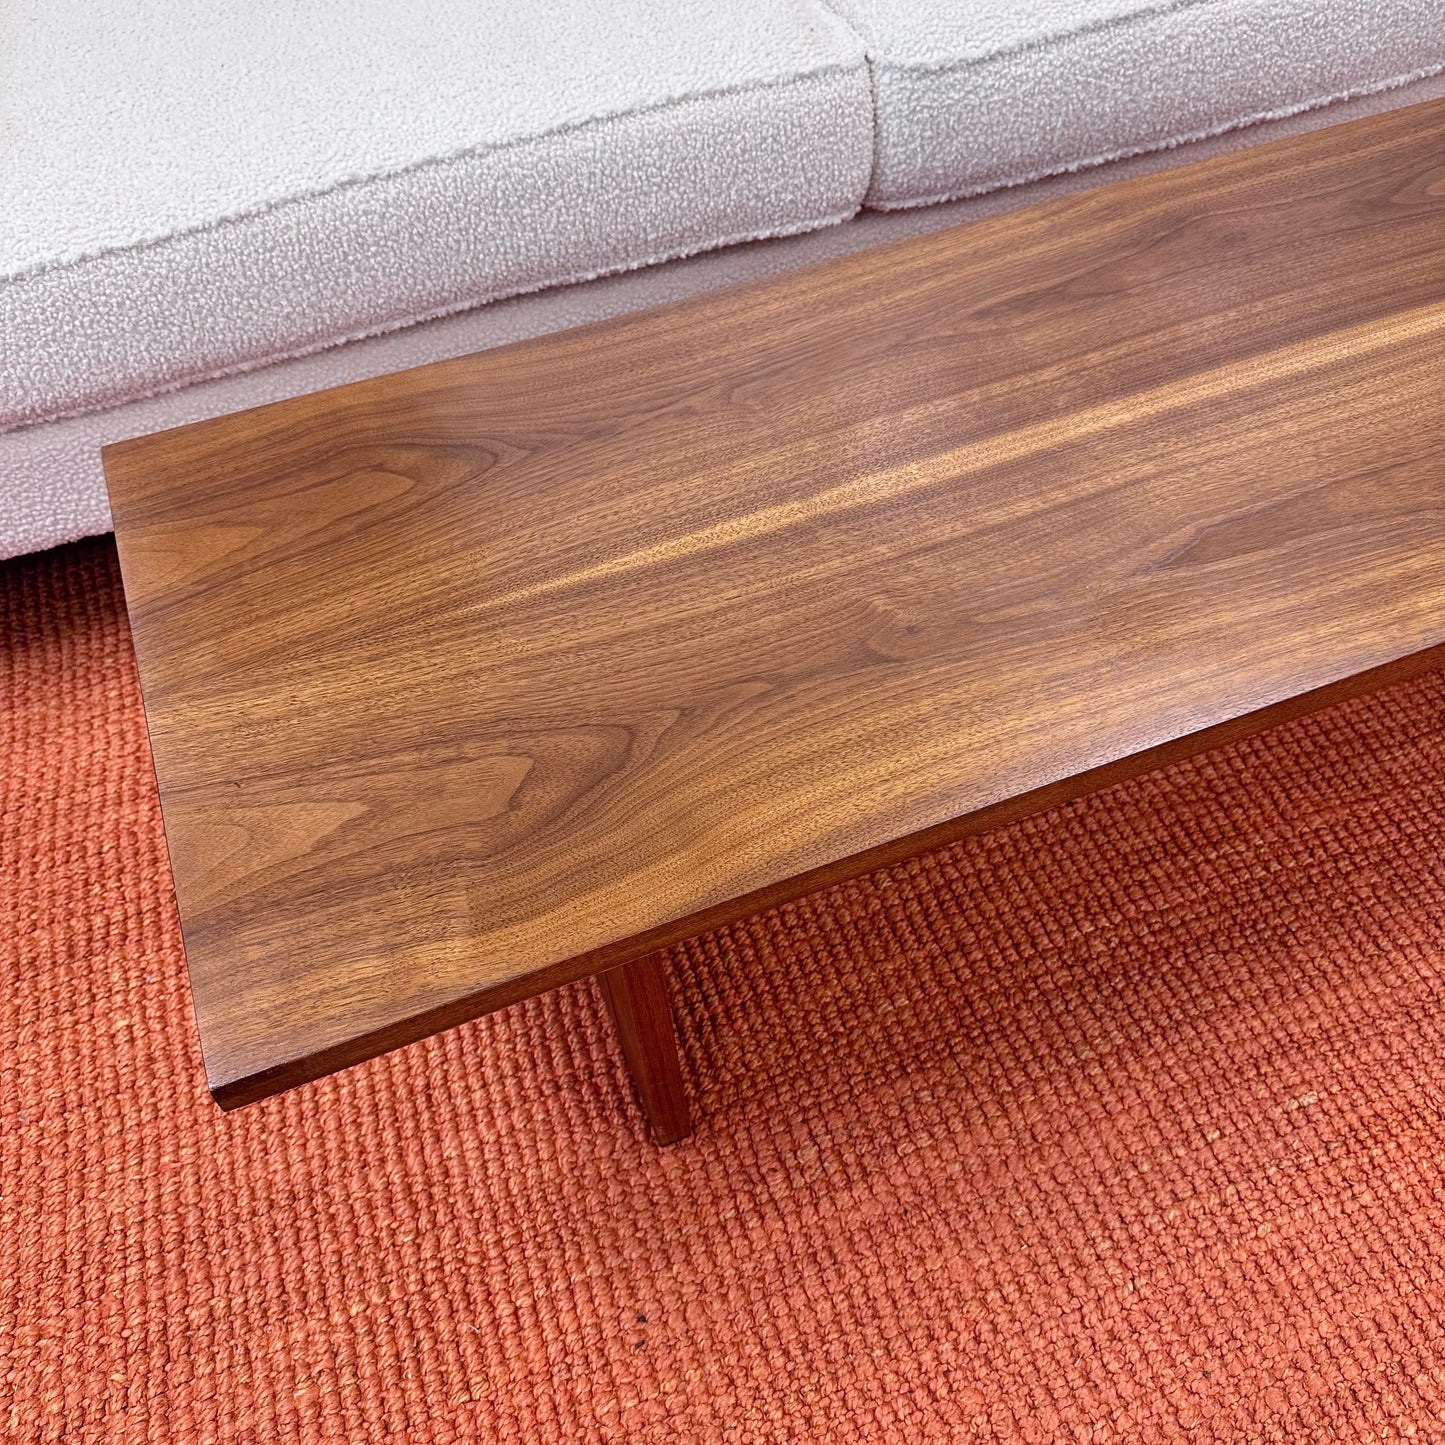 LANE WALNUT COFFEE TABLE WITH PEDESTALS